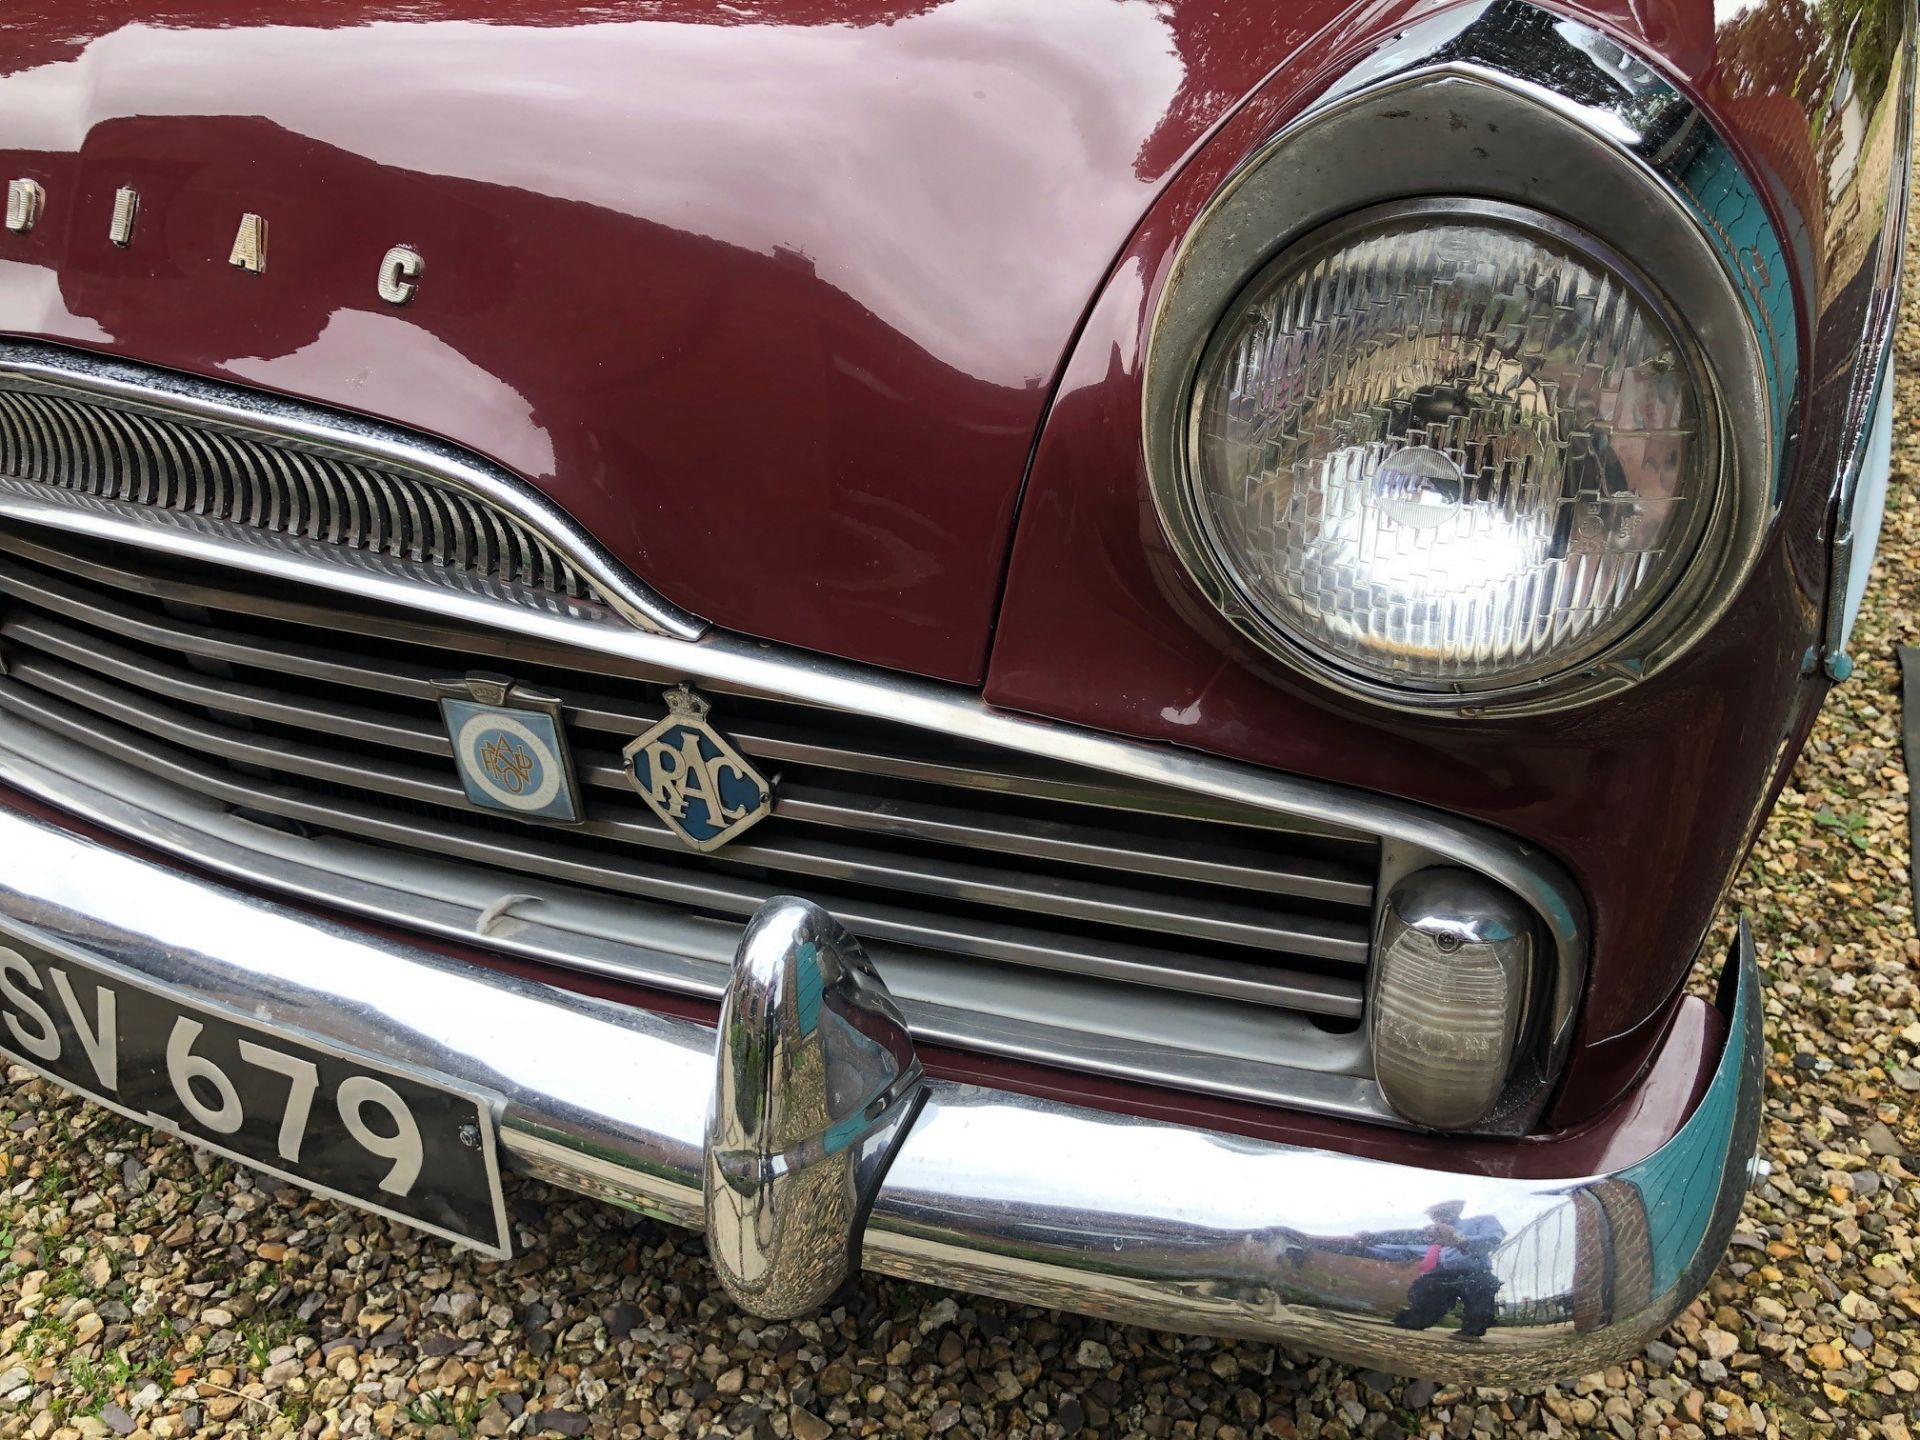 1960 Ford Zodiac Registration number OSV 679 Chassis number 206E306134 Maroon over grey Vinyl and - Image 36 of 70